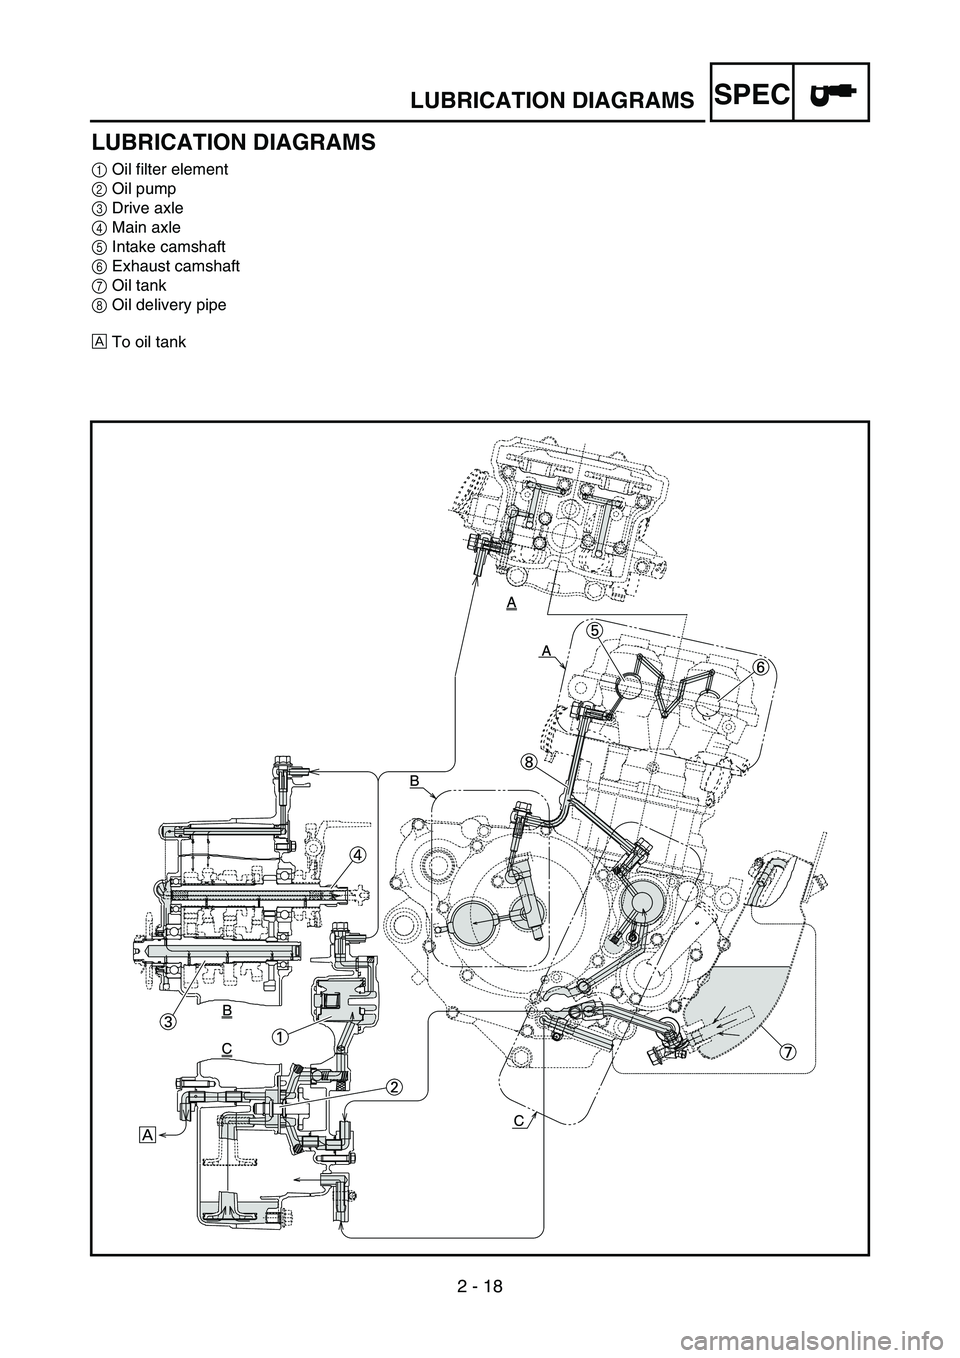 YAMAHA YZ250F 2007  Owners Manual 2 - 18
SPEC
LUBRICATION DIAGRAMS
1Oil filter element
2Oil pump
3Drive axle
4Main axle
5Intake camshaft
6Exhaust camshaft
7Oil tank
8Oil delivery pipe
ÈTo oil tank
LUBRICATION DIAGRAMS 